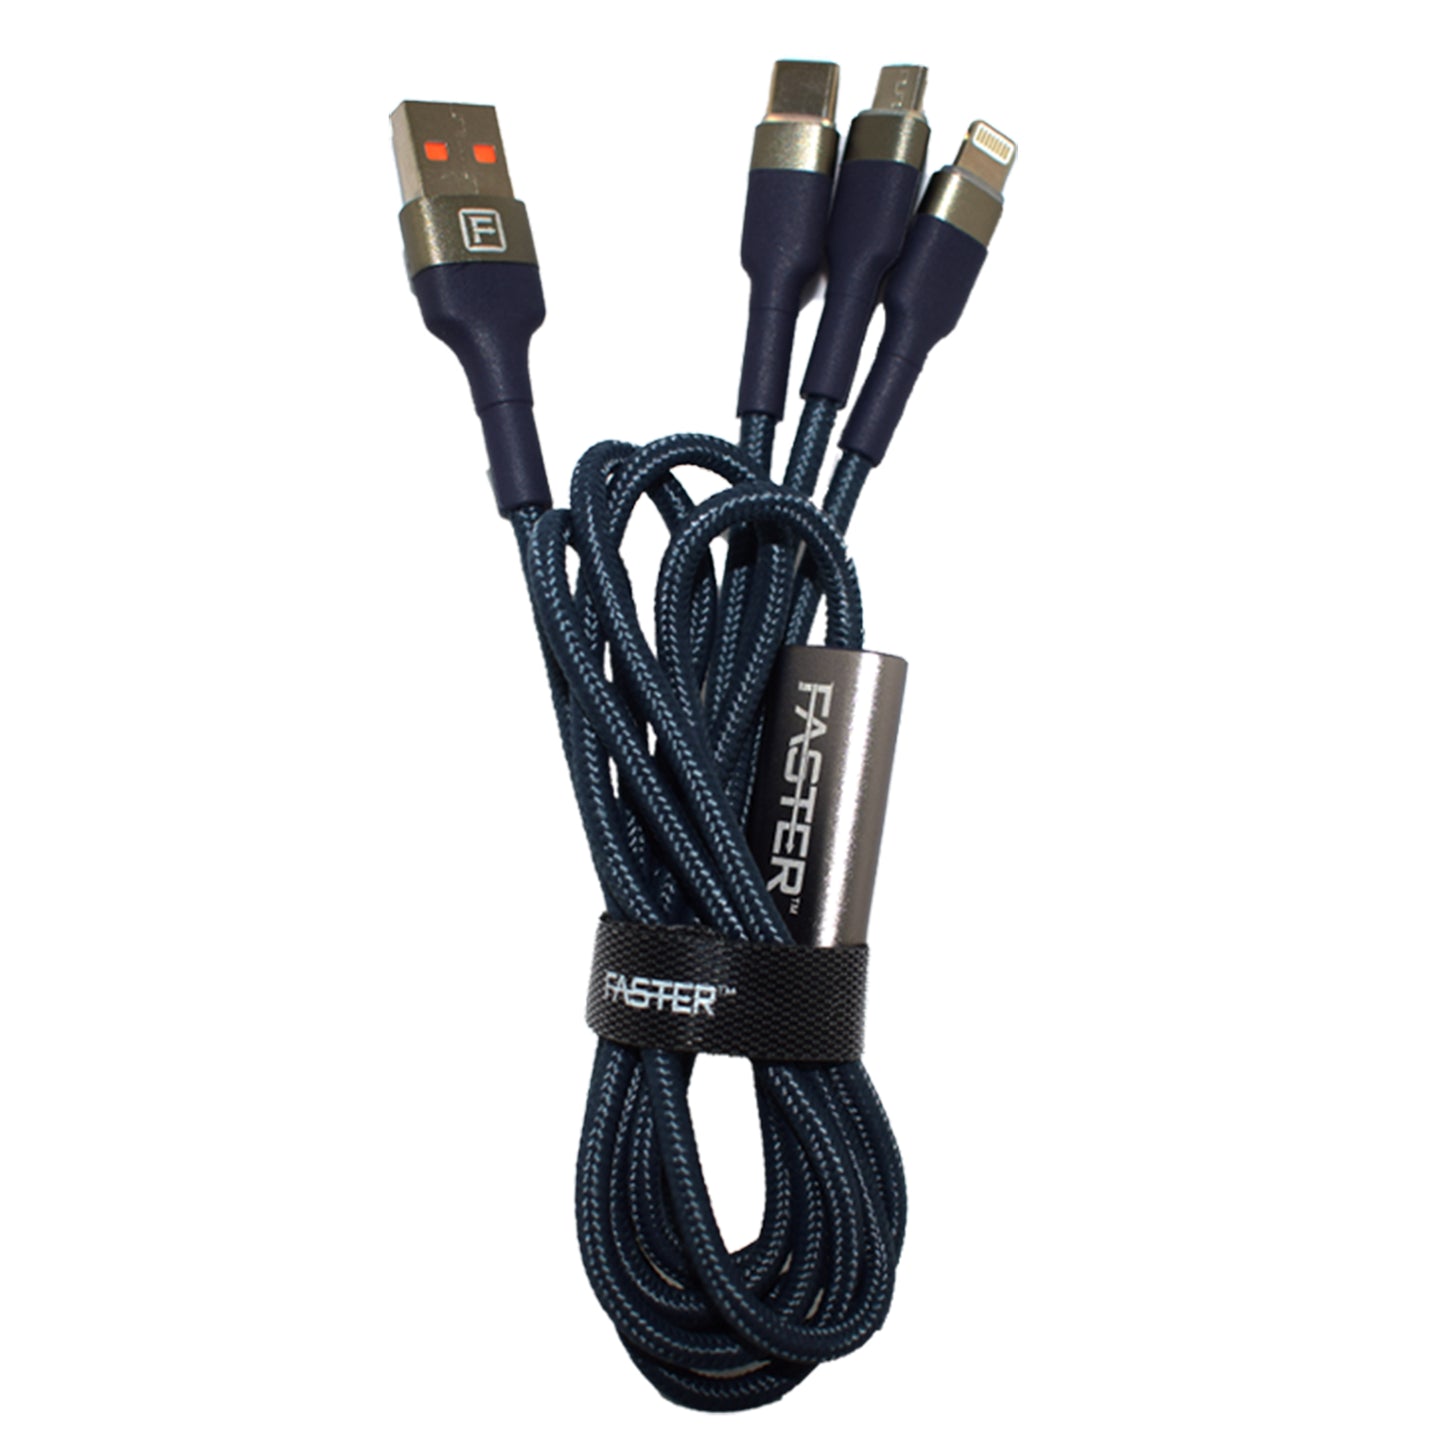 Faster D4 Quick Charge Denim Braided 3-in-1 Data Cable